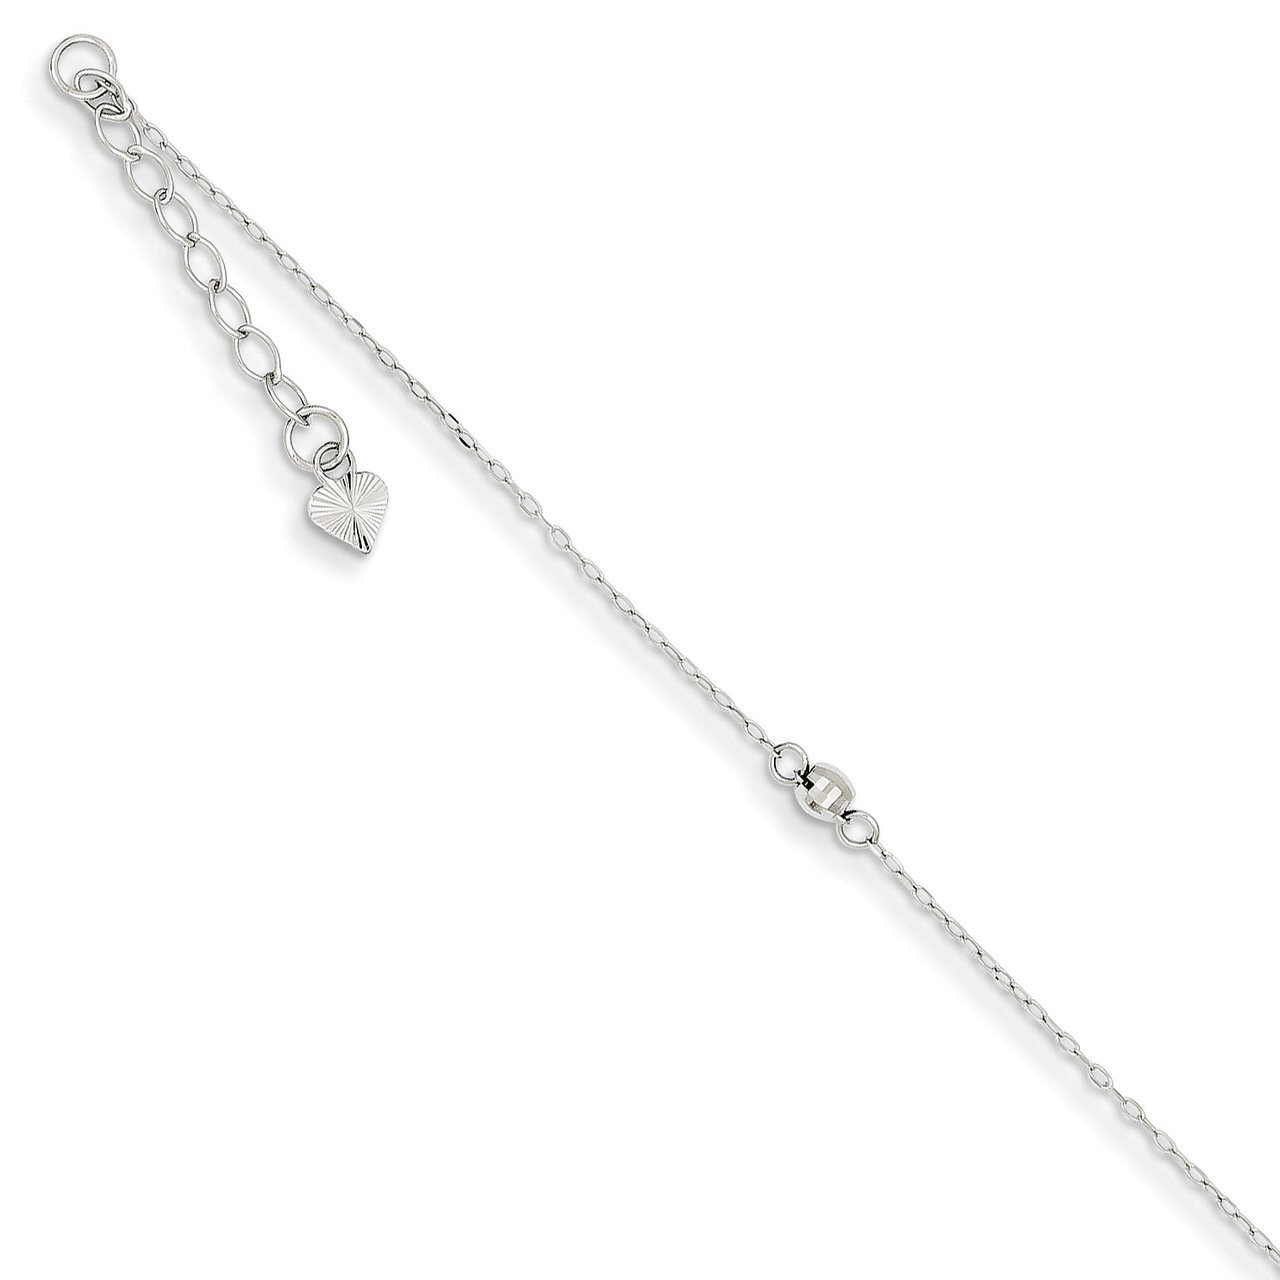 Mirror Beaded Anklet 9 Inch 14k White Gold ANK191-9